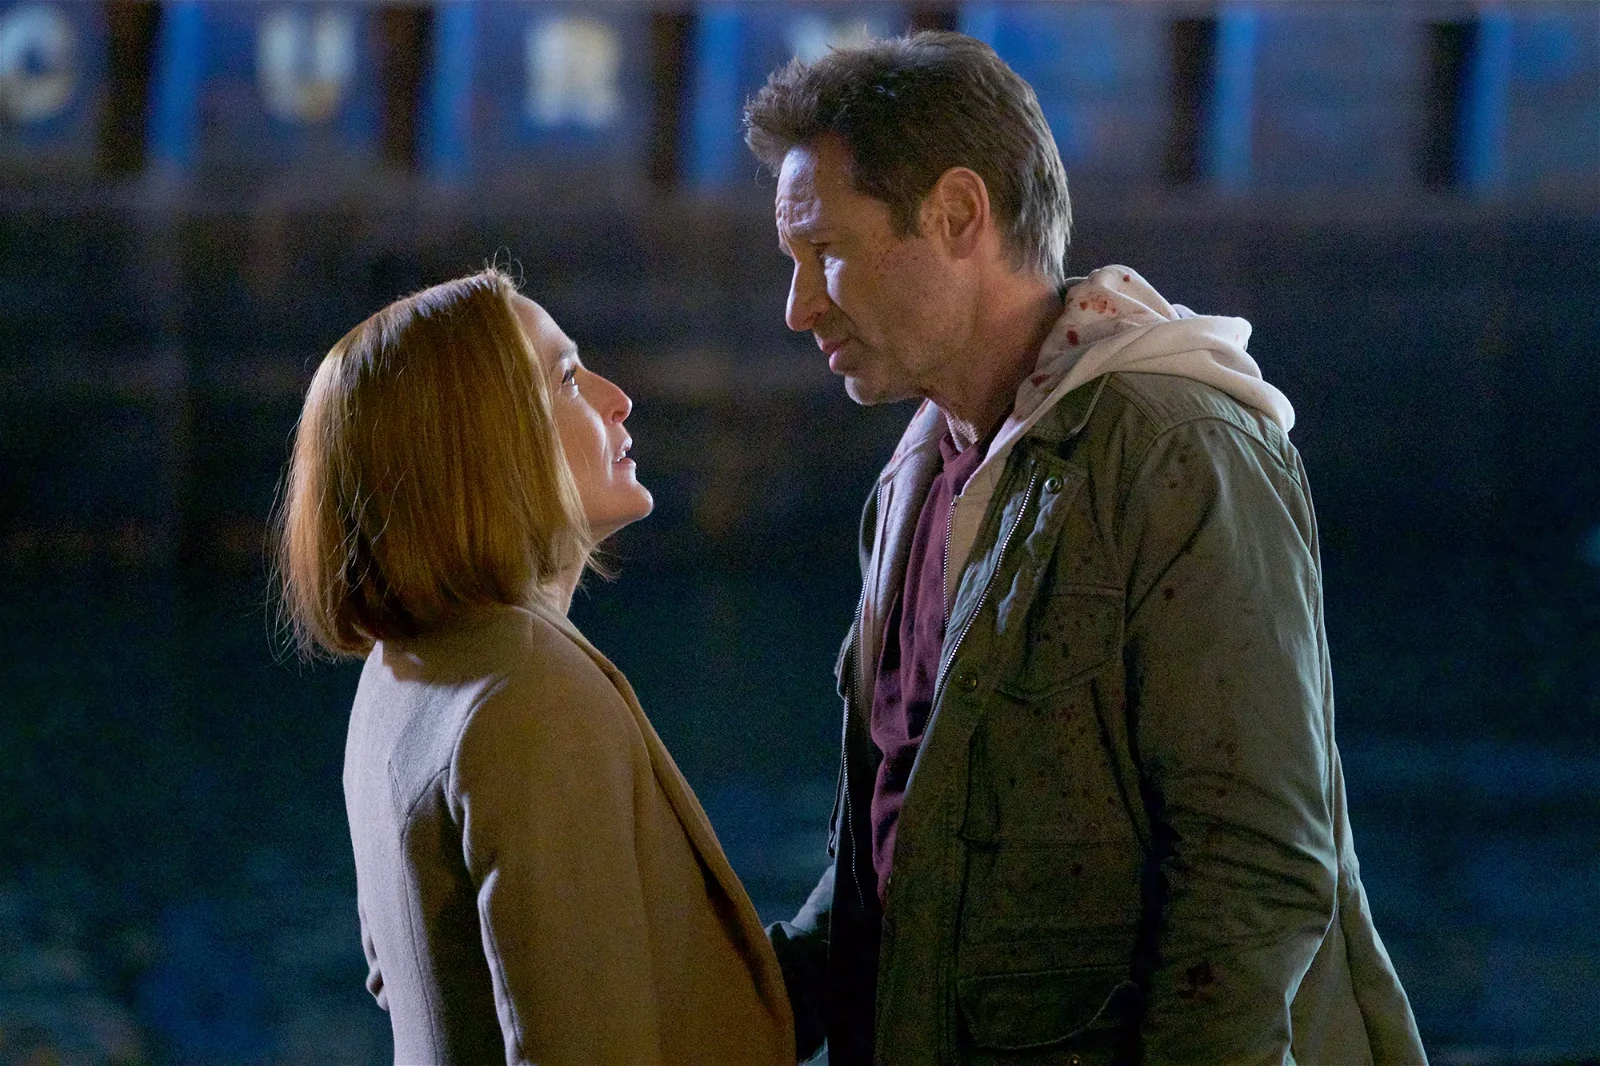 Gillian Anderson and David Duchovny in the climax episode of The X-Files